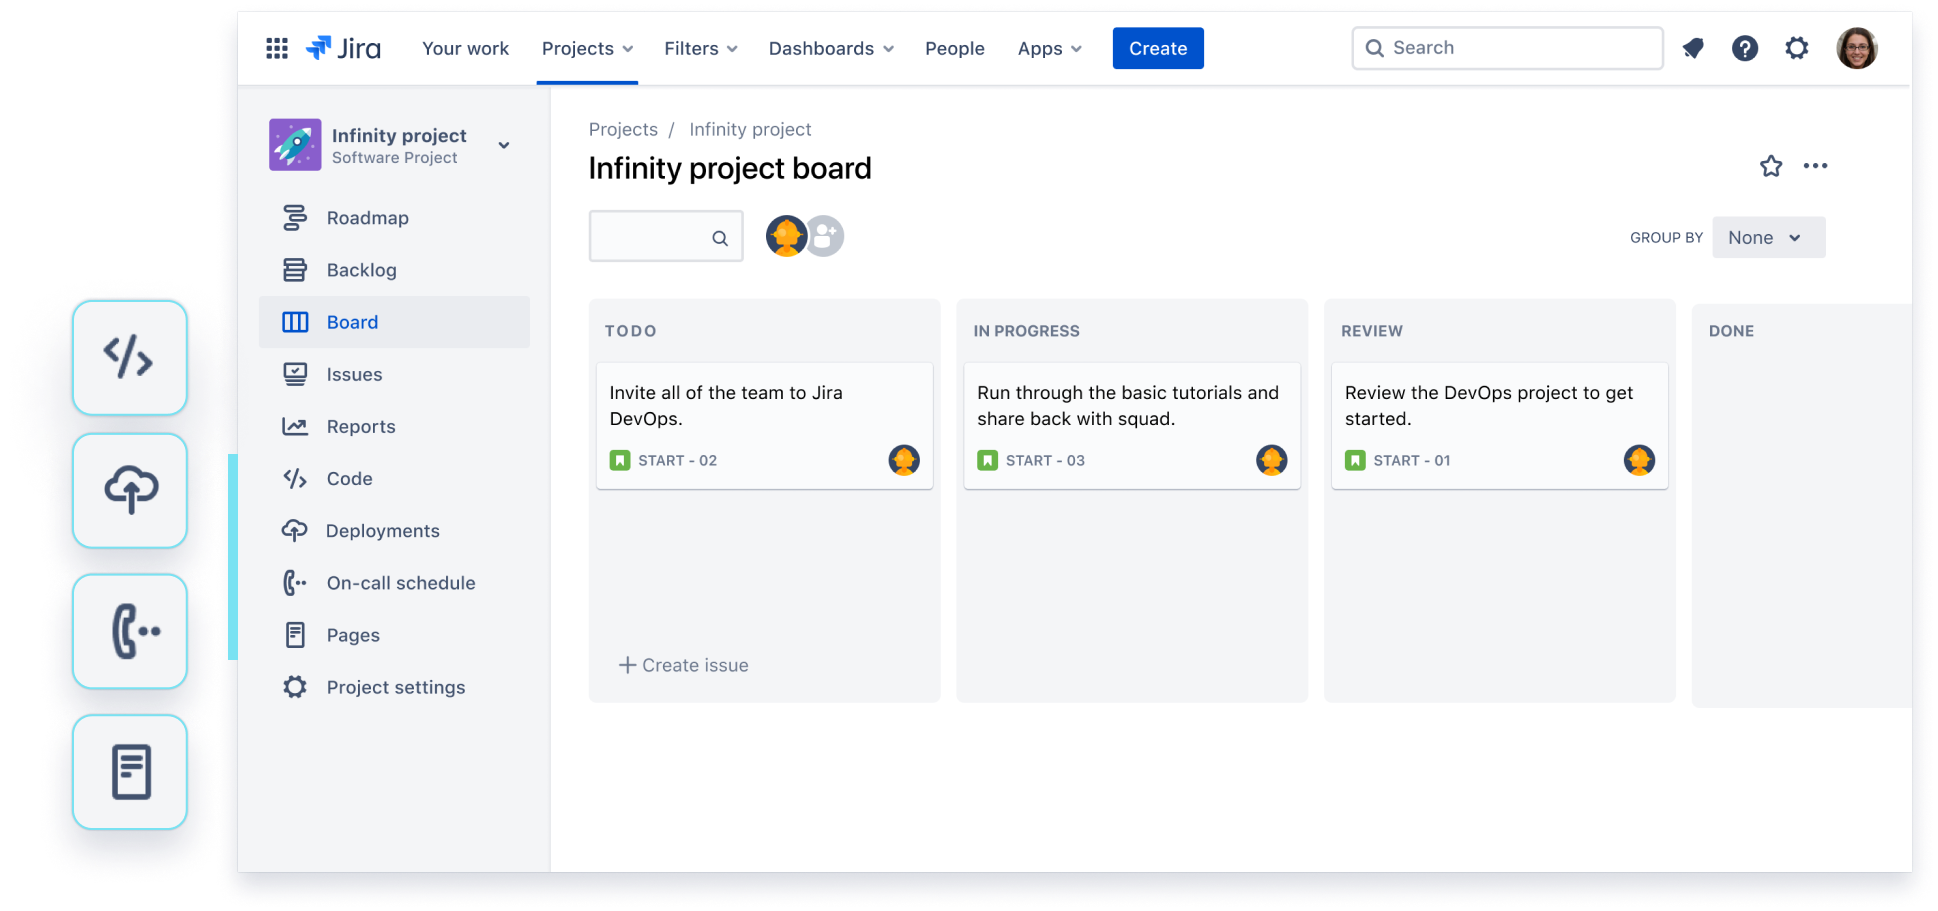 Open DevOps is powered by Jira Software, the #1 tool used by agile teams. Teams can focus on building and operating software while Open DevOps integrates Atlassian and partner tools auBring your existing tools or swap out our tools with just a few clicks.